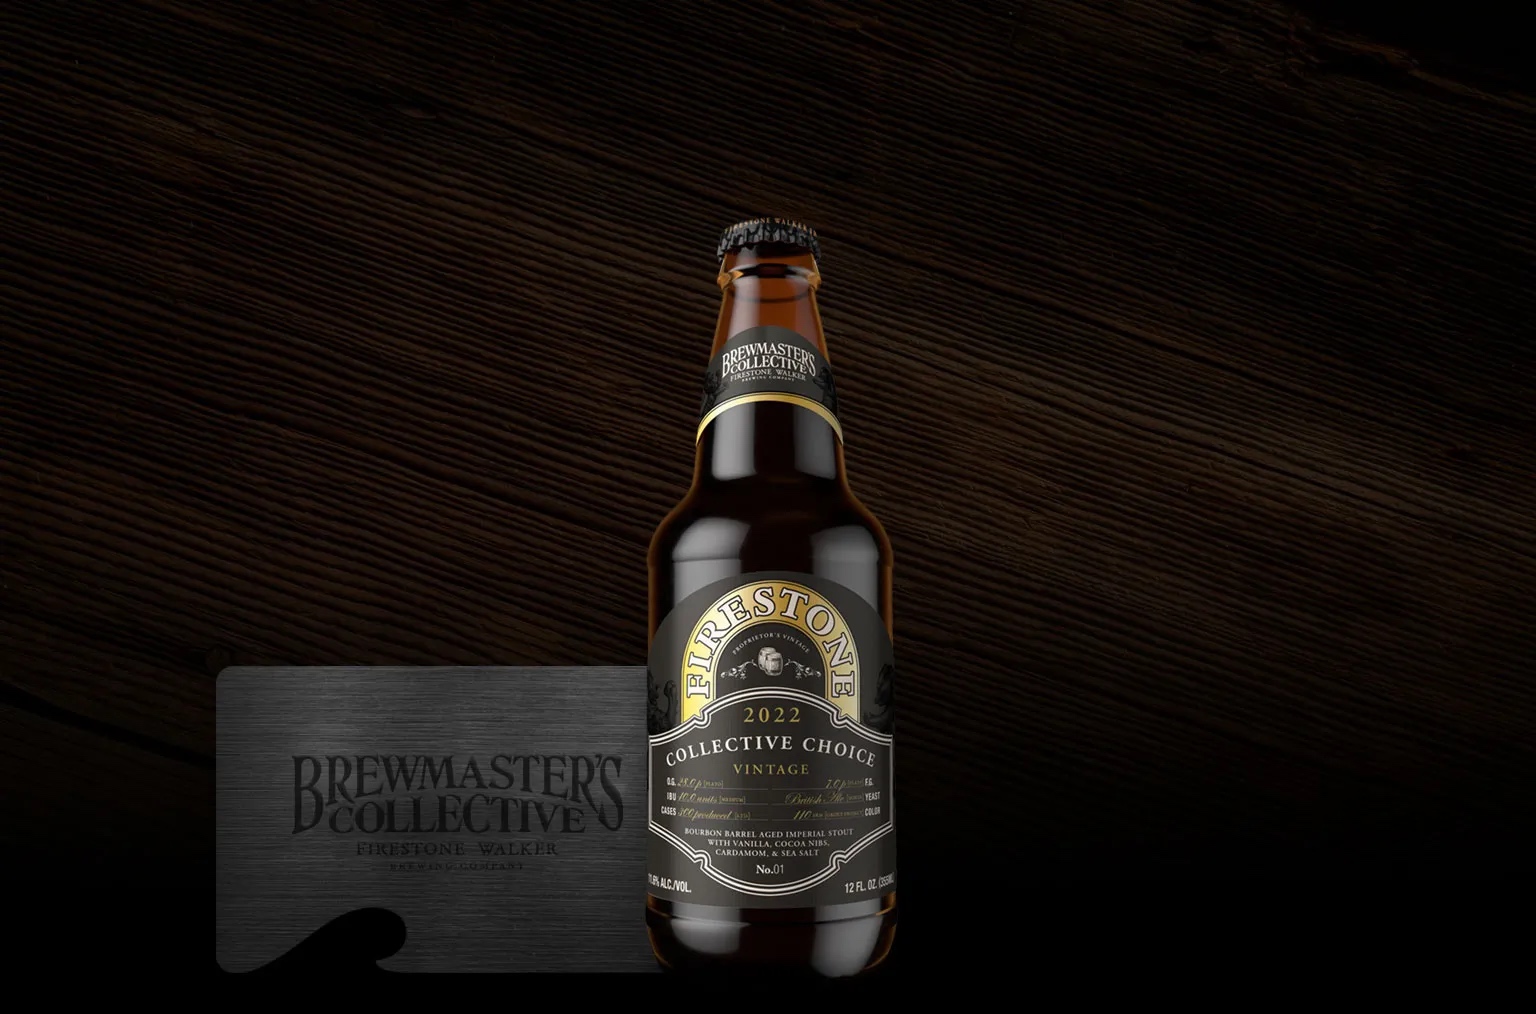 Firestone Walker 2022 Brewmaster’s Collective January - Welcome Pack